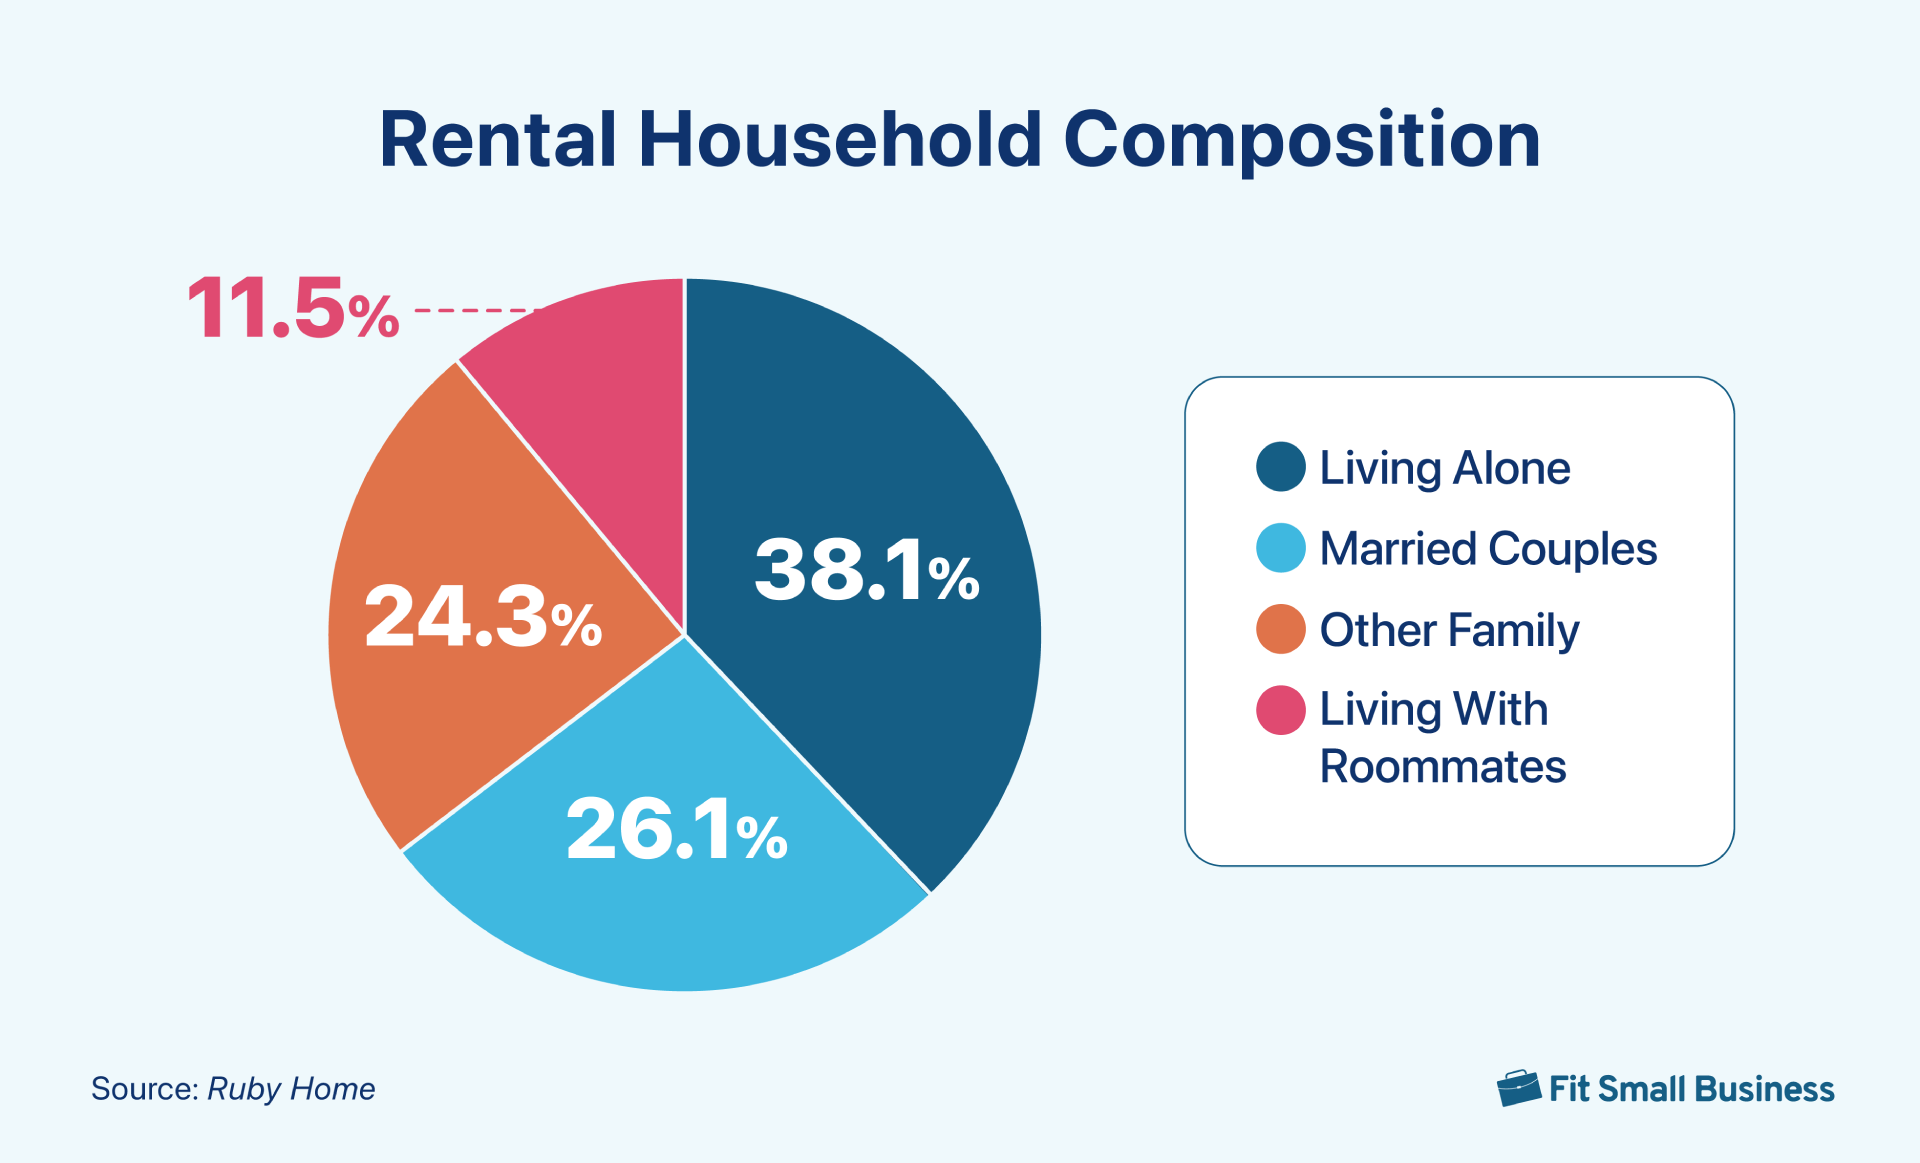 Pie graph showing the composition of a rental household